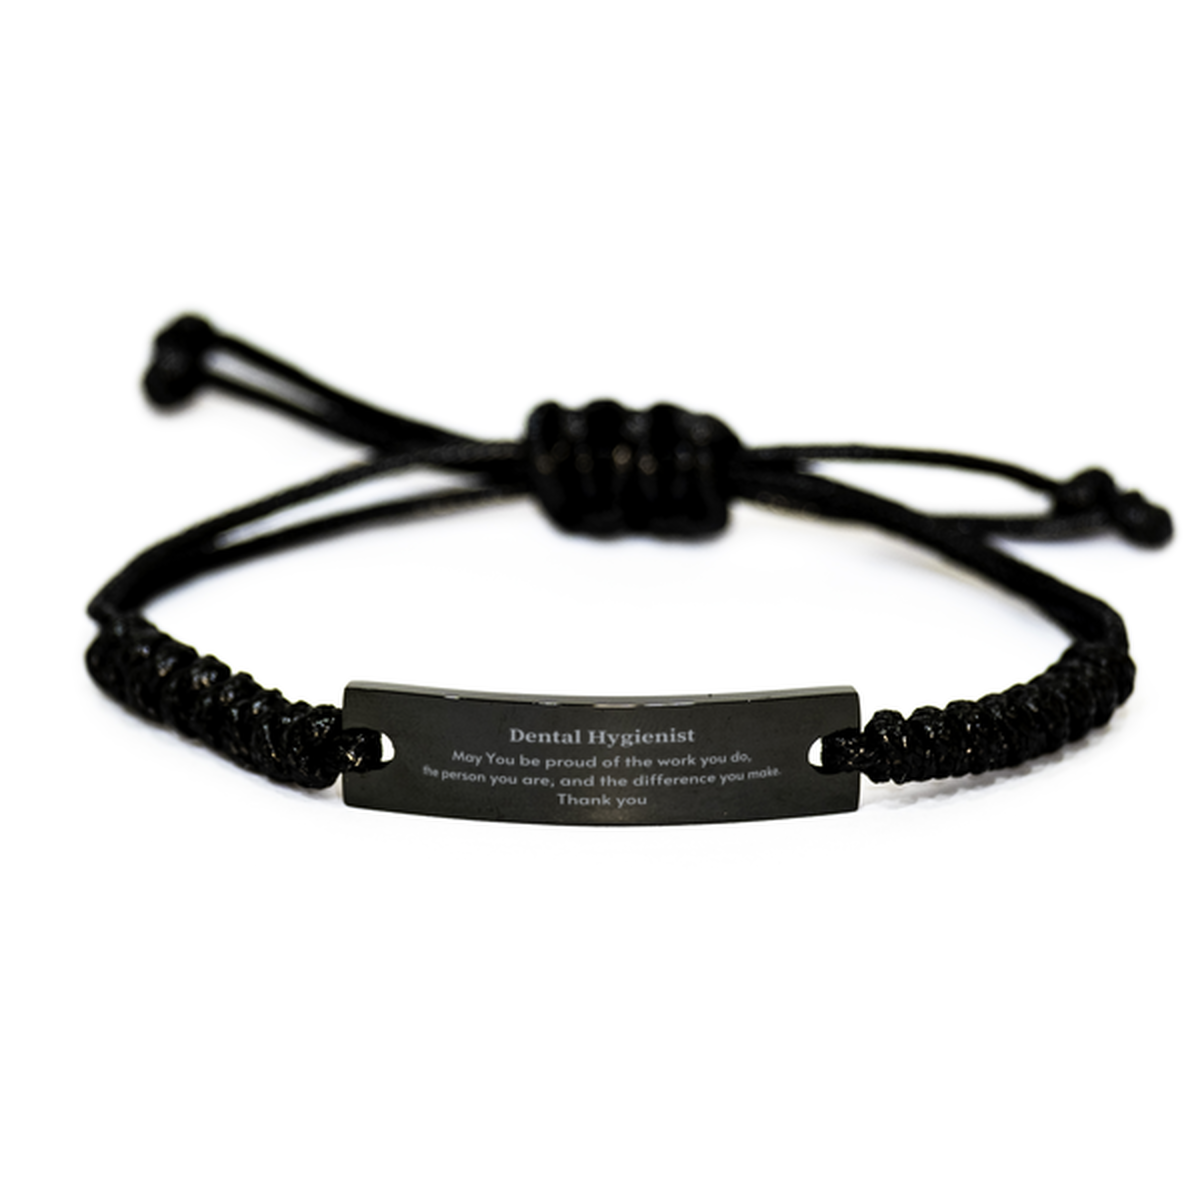 Heartwarming Black Rope Bracelet Retirement Coworkers Gifts for Dental Hygienist, Dental Hygienist May You be proud of the work you do, the person you are Gifts for Boss Men Women Friends